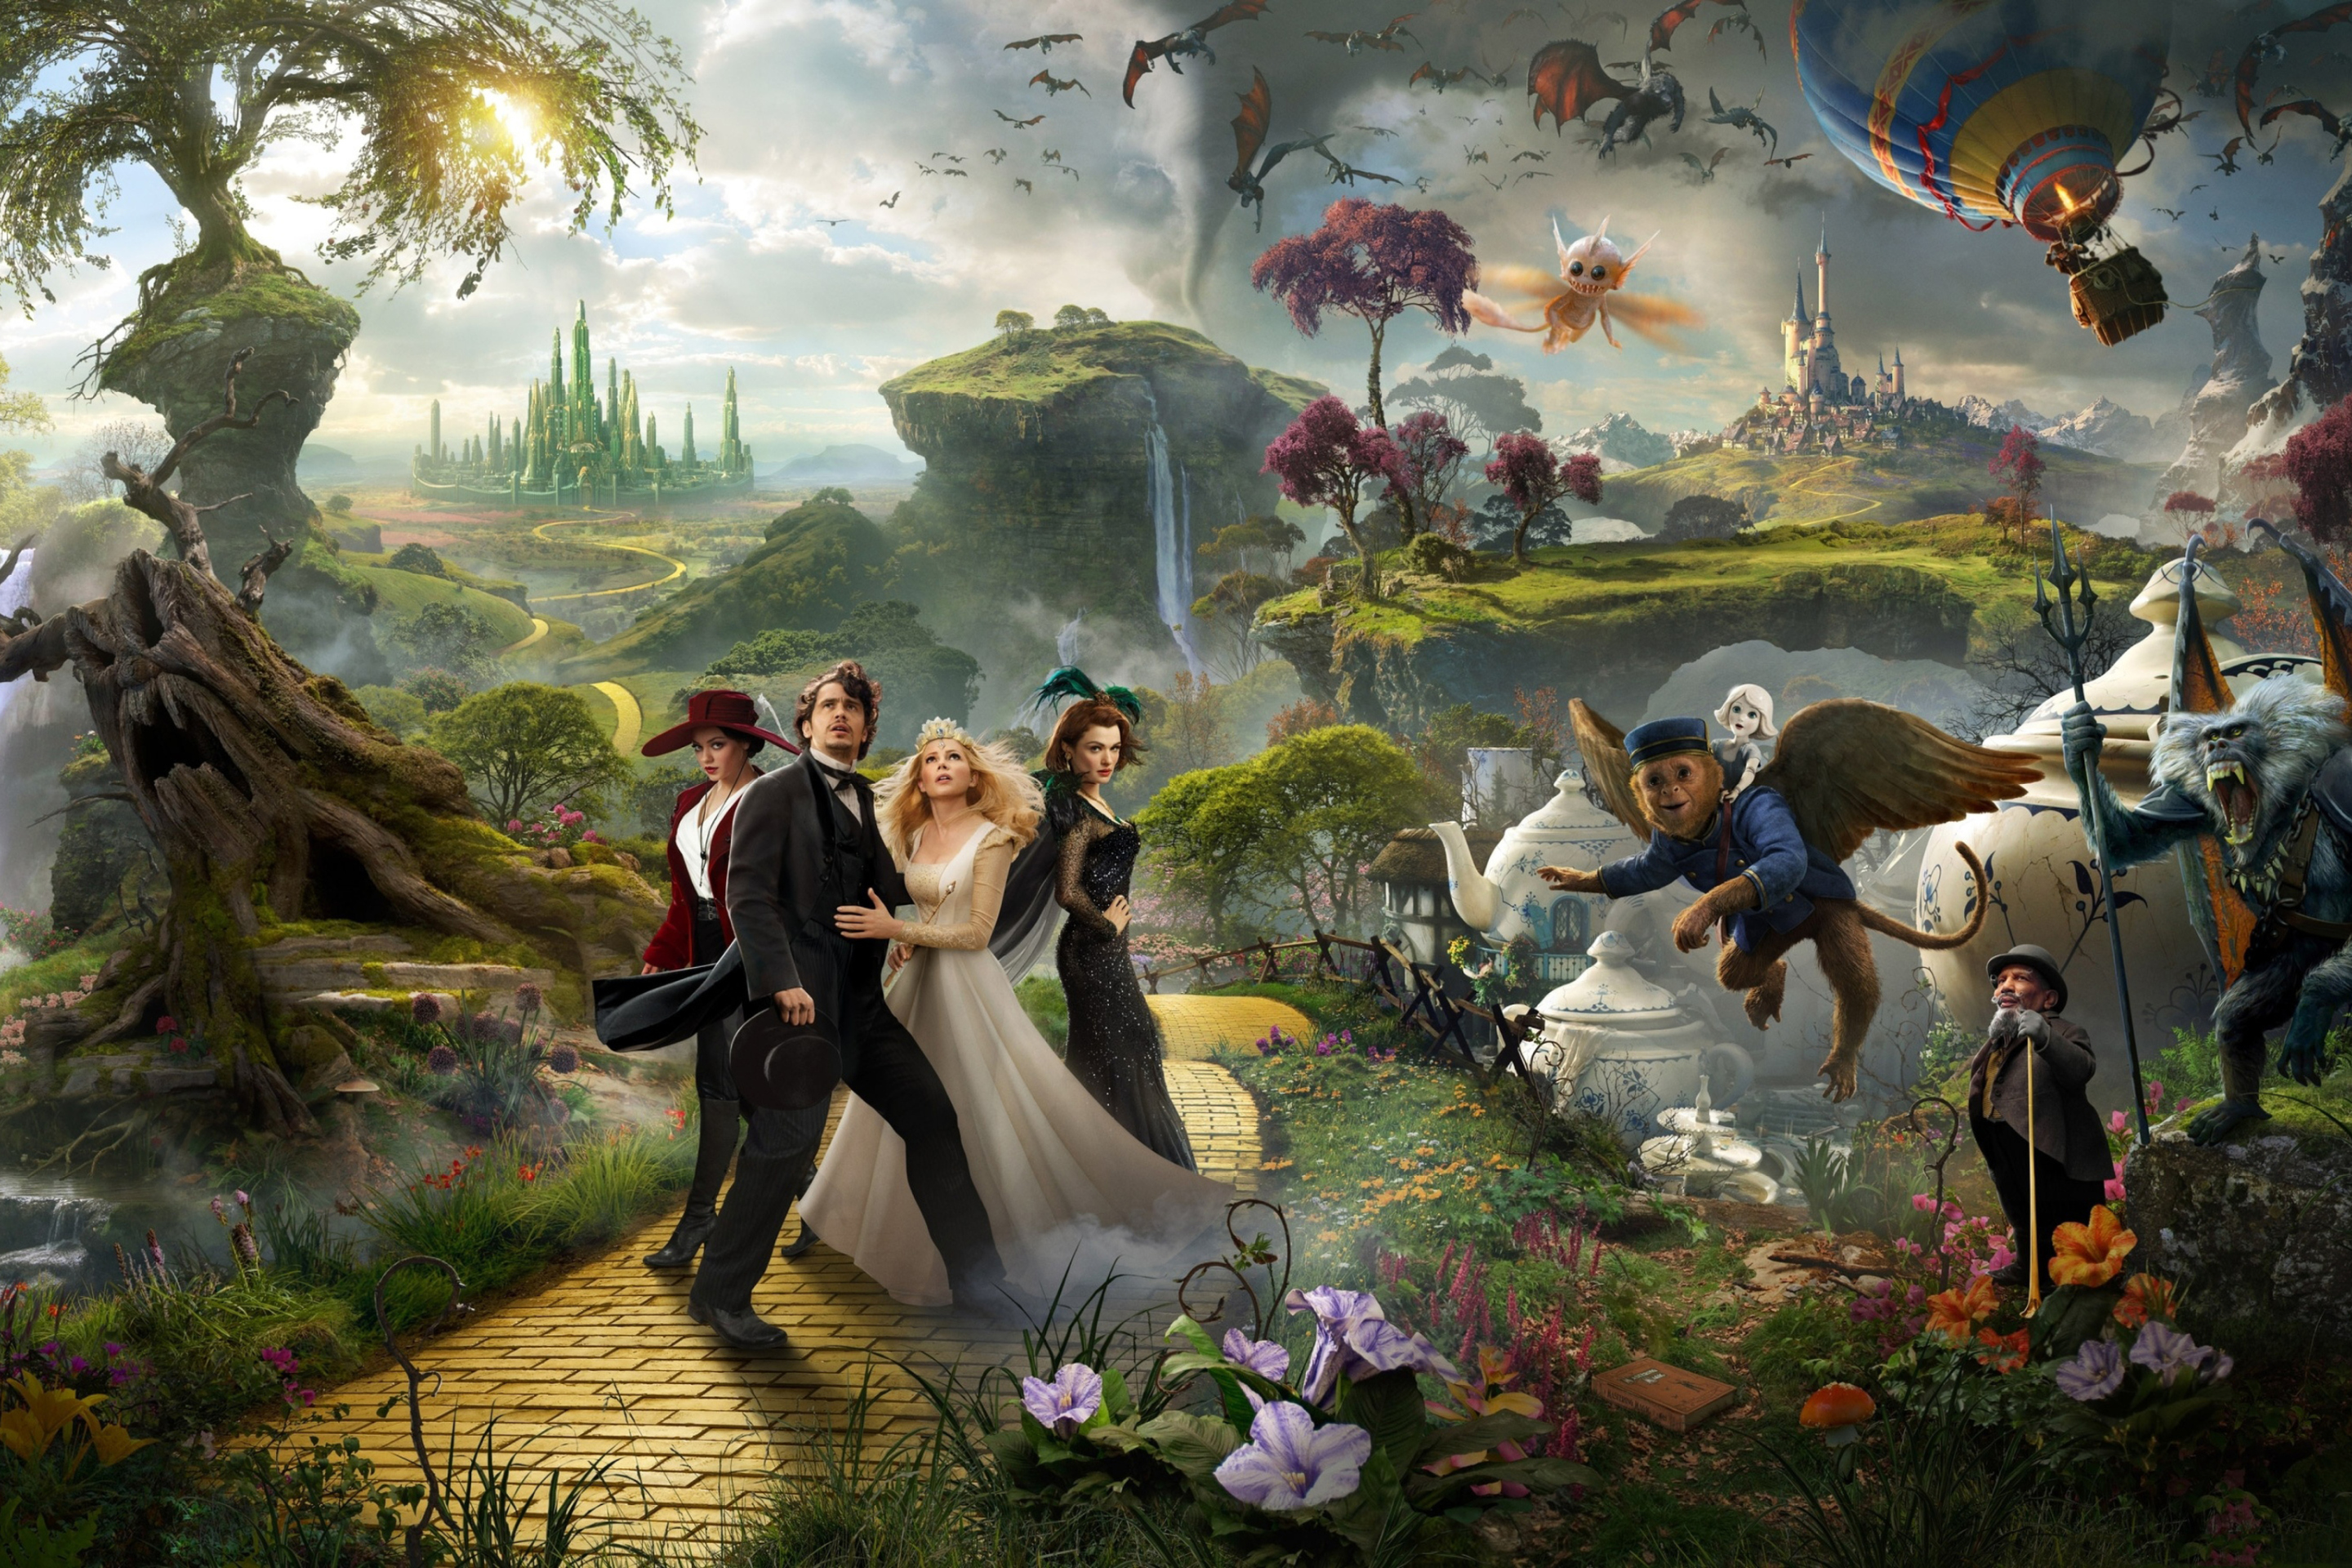 Das Oz The Great And Powerful 2013 Movie Wallpaper 2880x1920